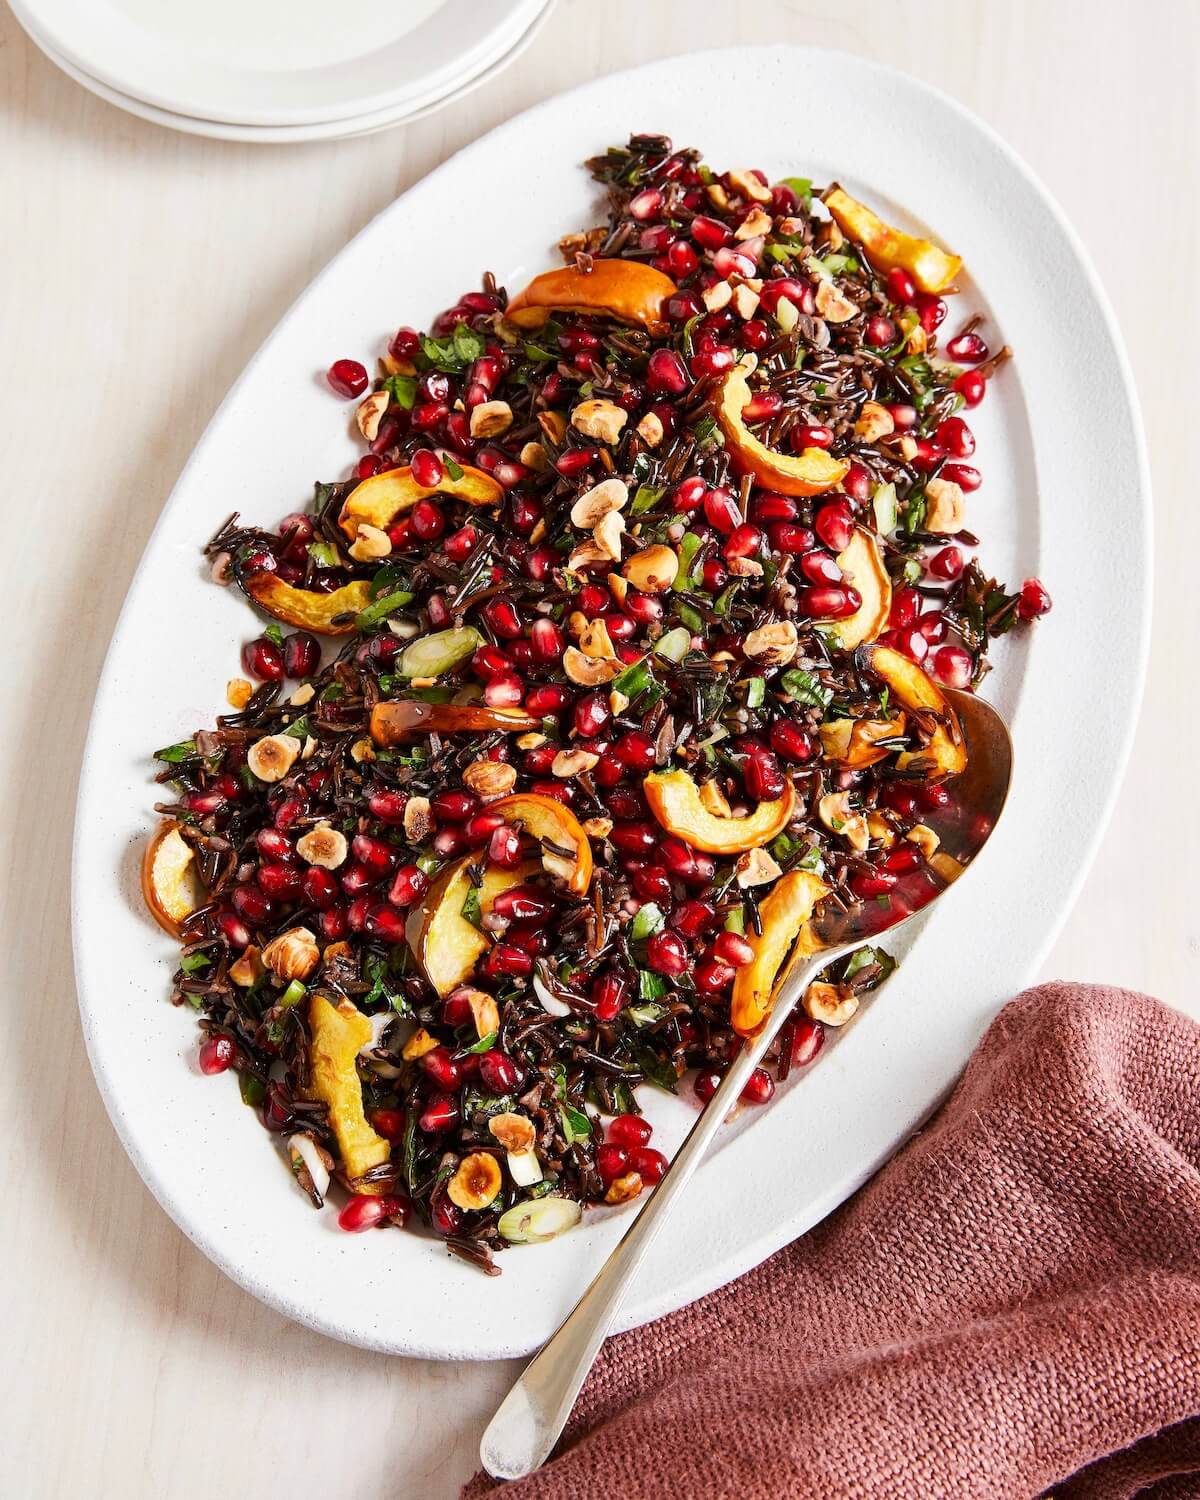 platter of rice salad with roasted squash and pomegranate arils